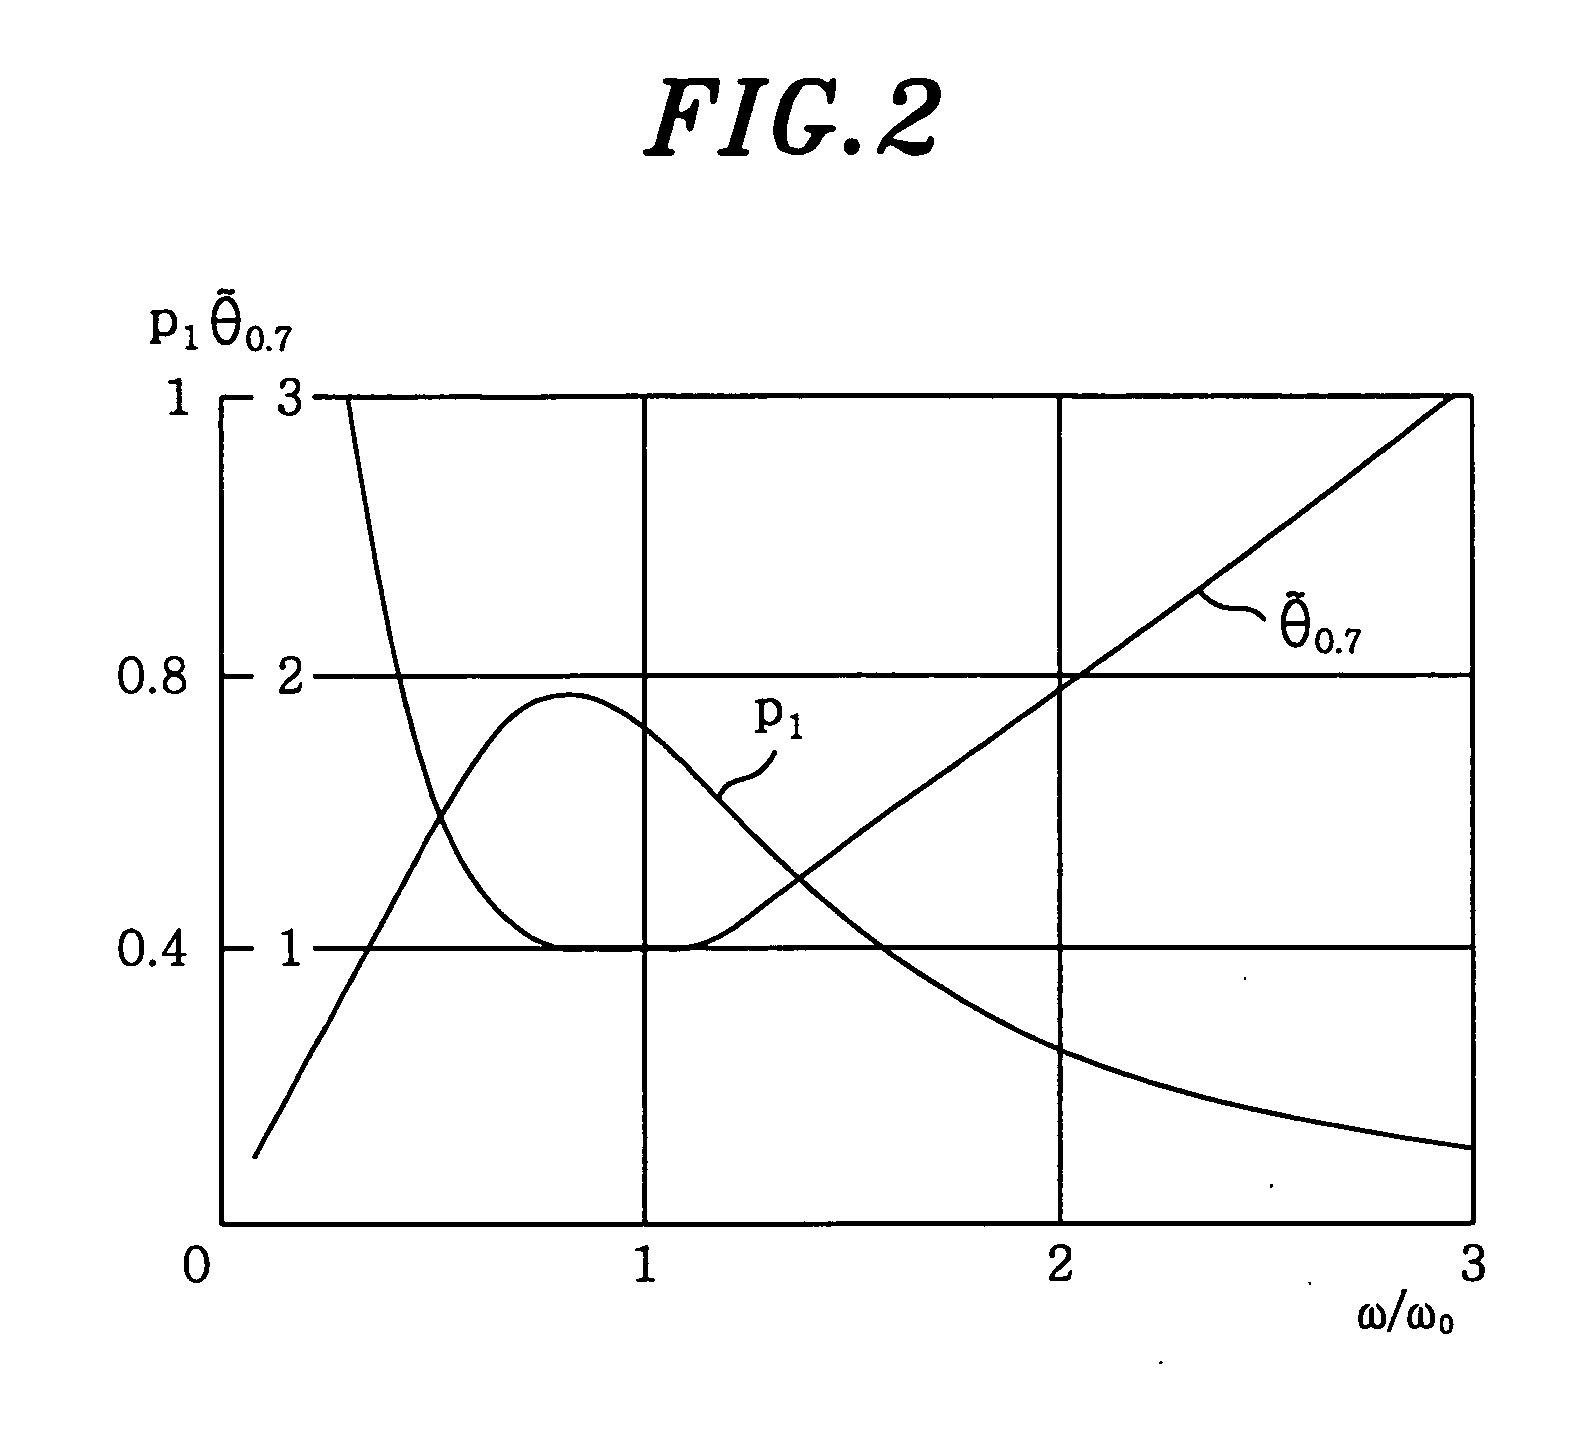 Ultrasonic ranging system and method thereof in air by using parametric array